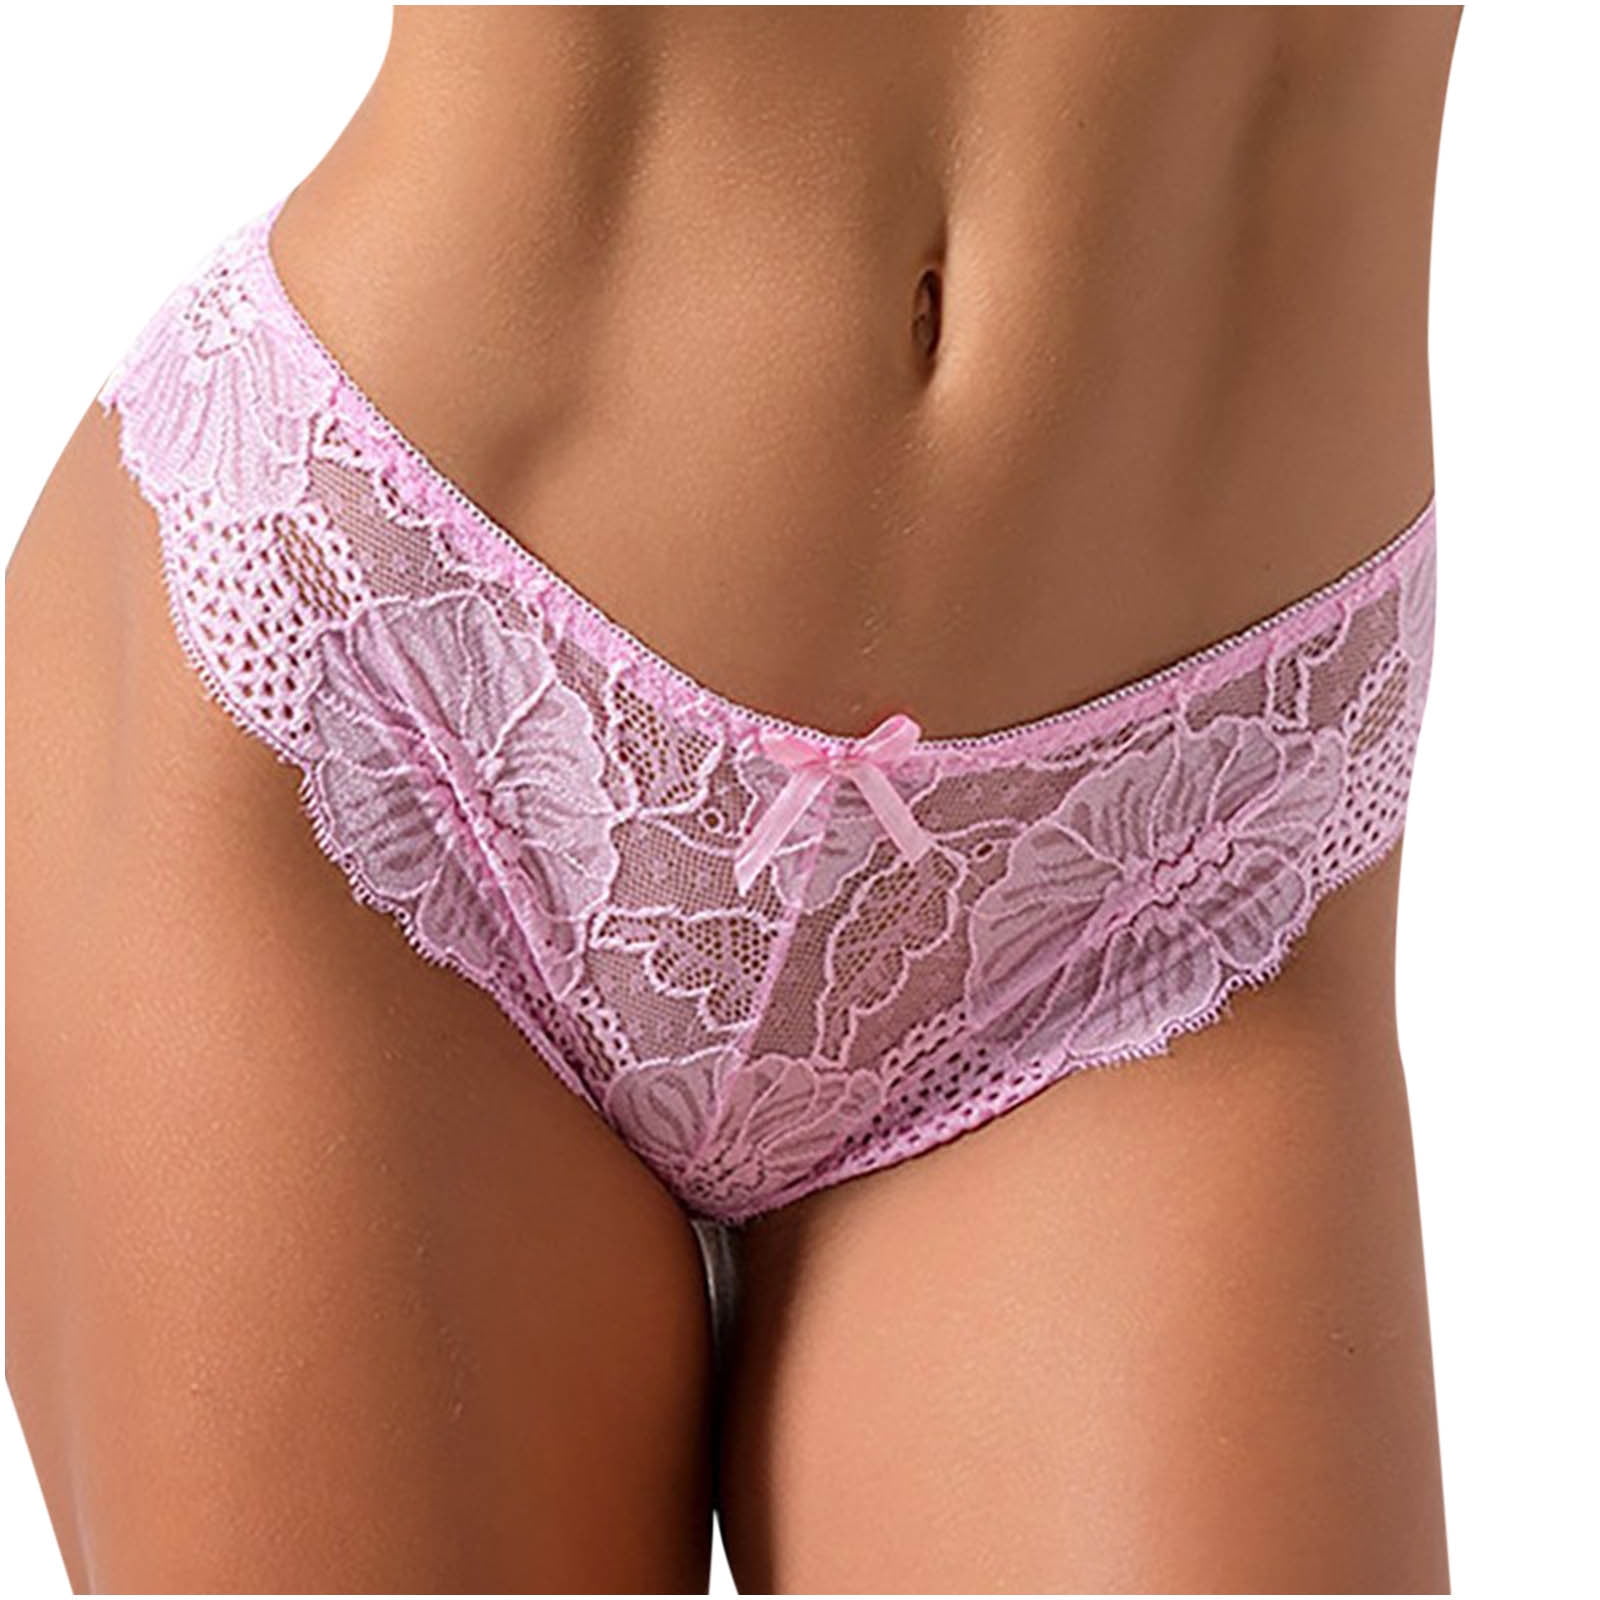 PINK Panties: Cheeky, Cotton, Lace, Seamless & More